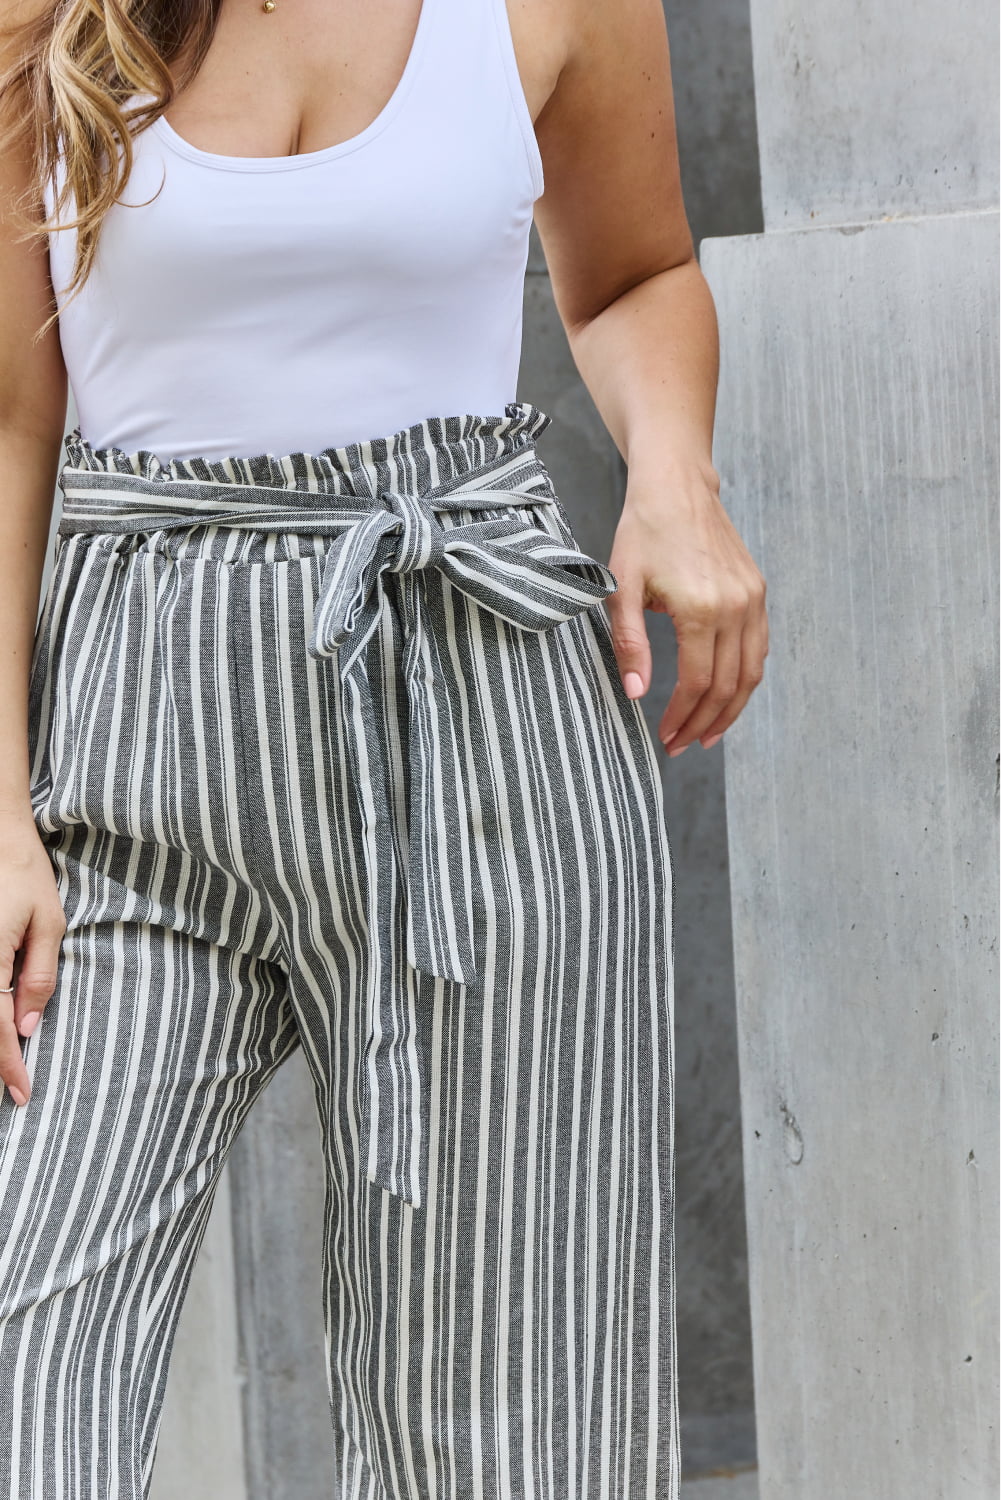 Find Your Path Striped Culotte Pants